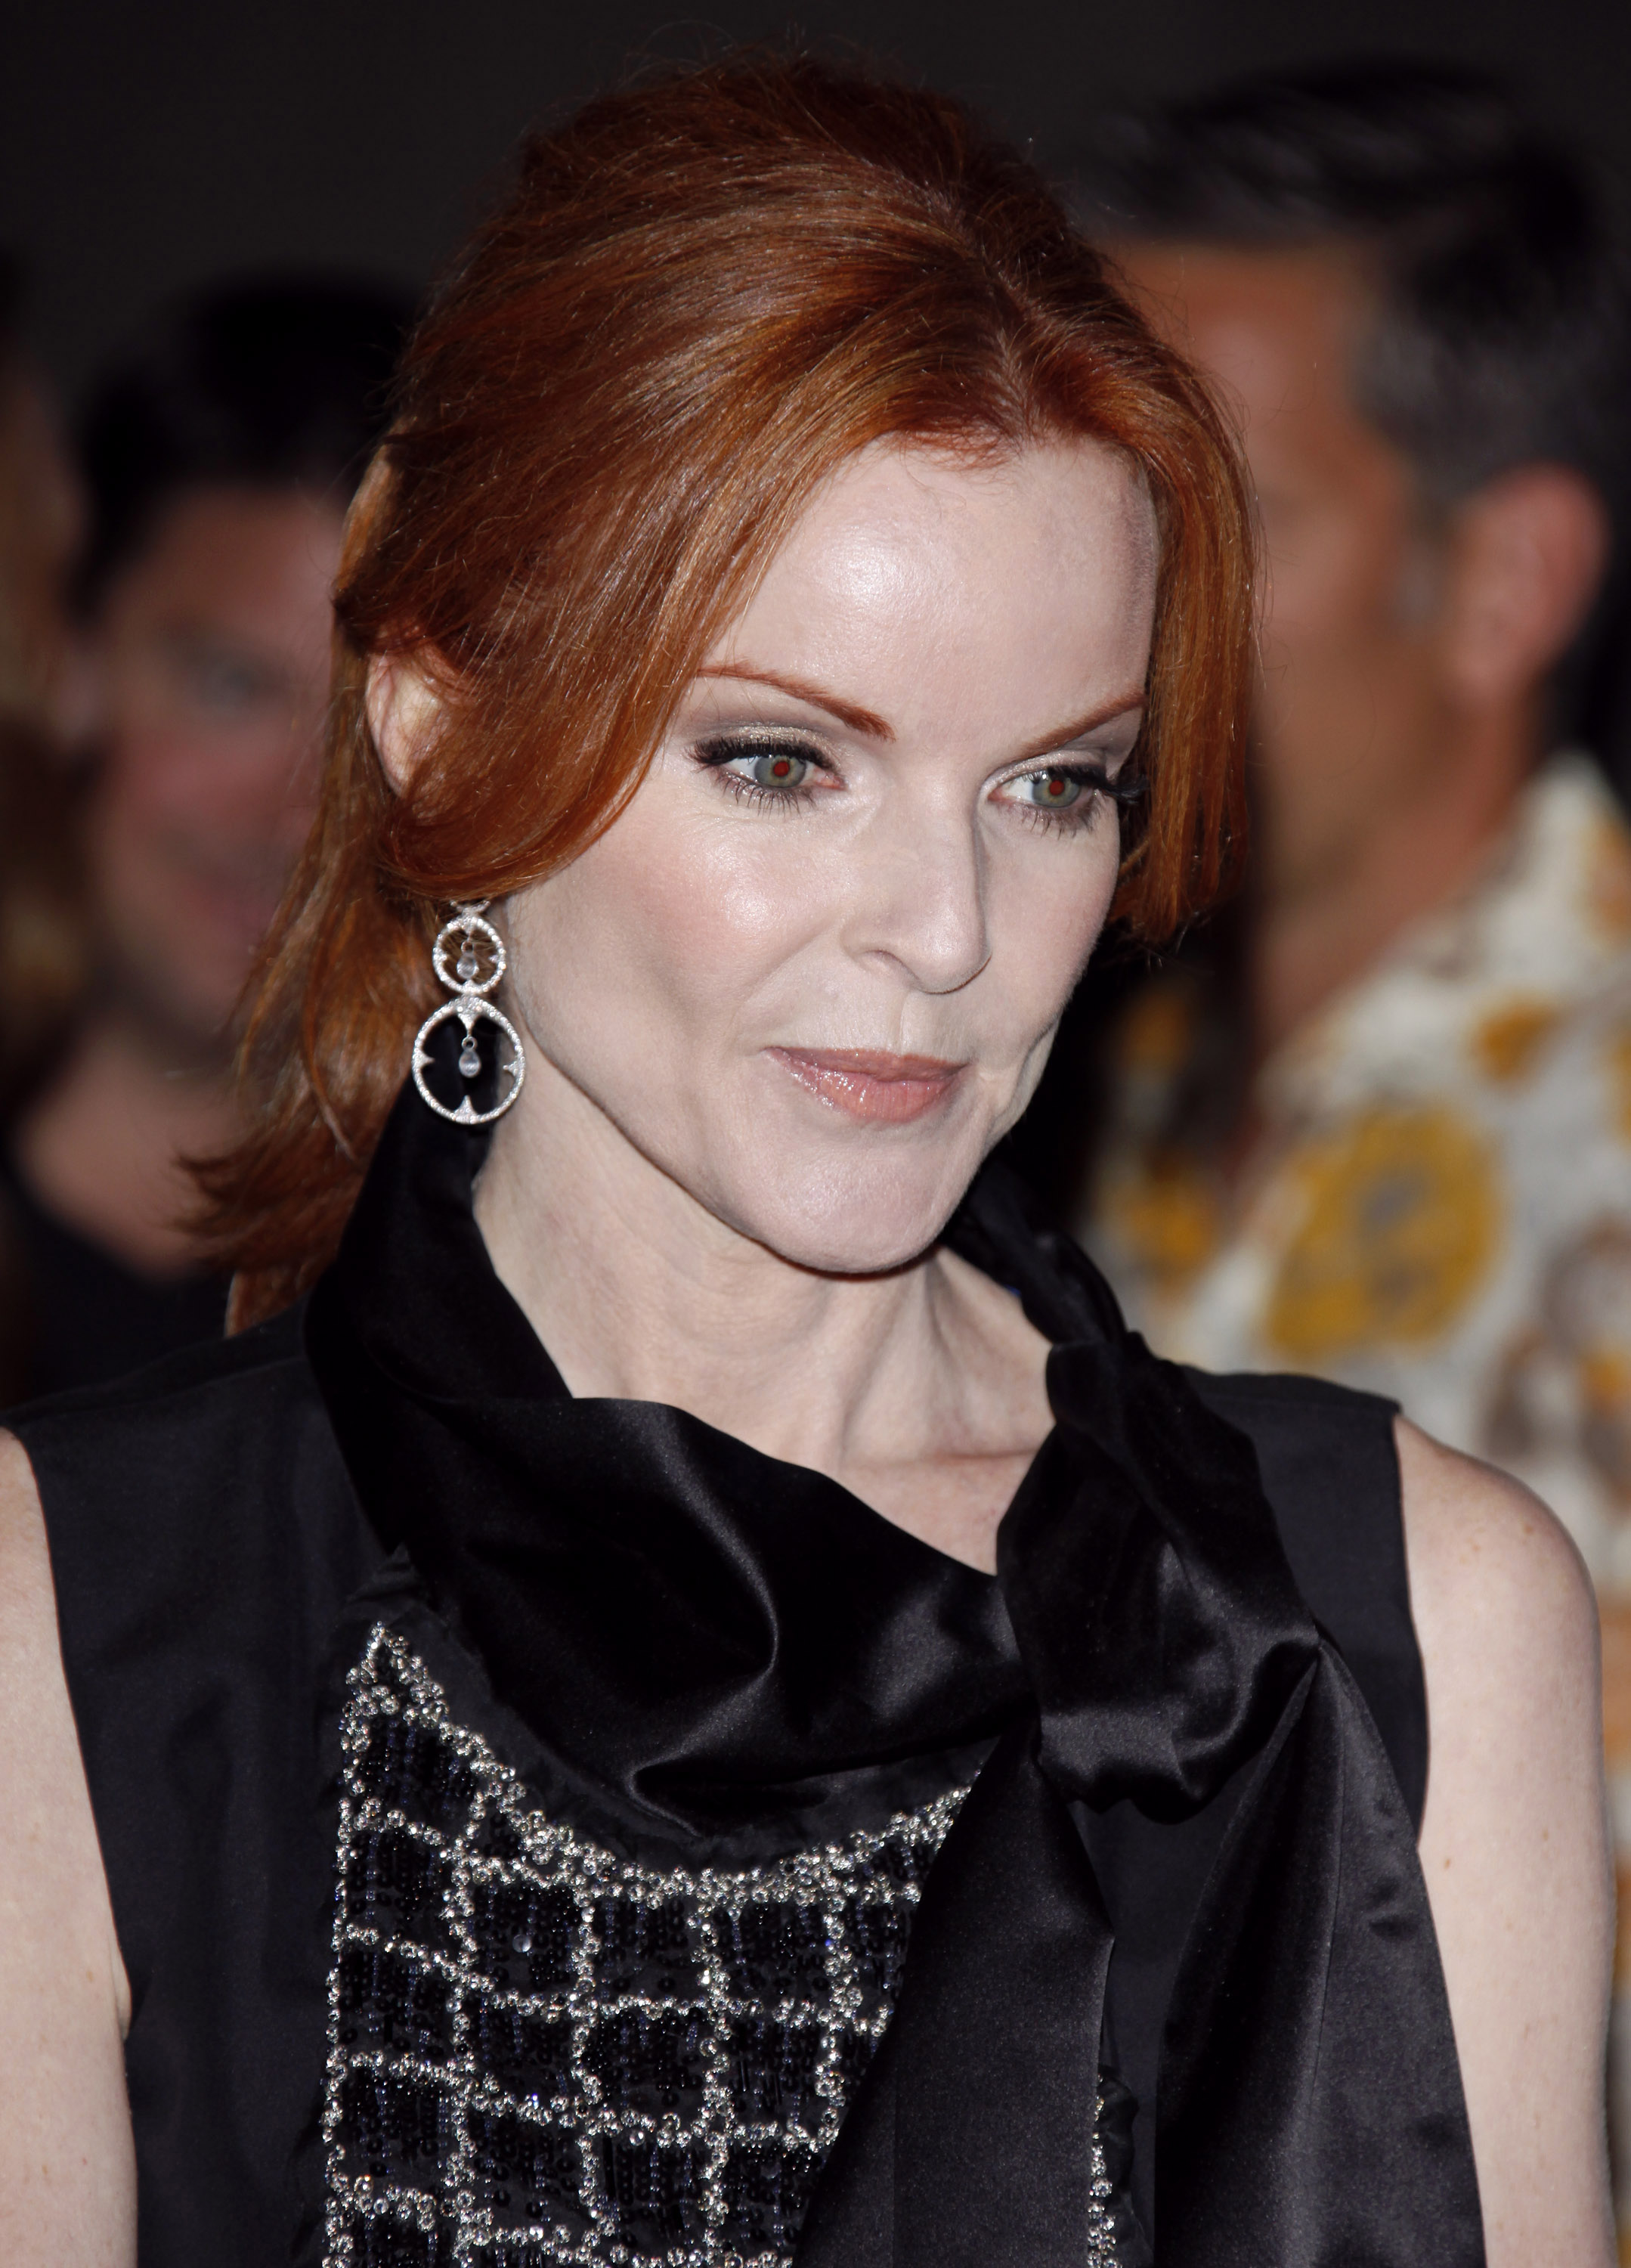 Marcia Cross at the "Rock A Little, Feed A Lot" Benefit Concert on September 29, 2009, in Los Angeles, California. | Source: Getty Images